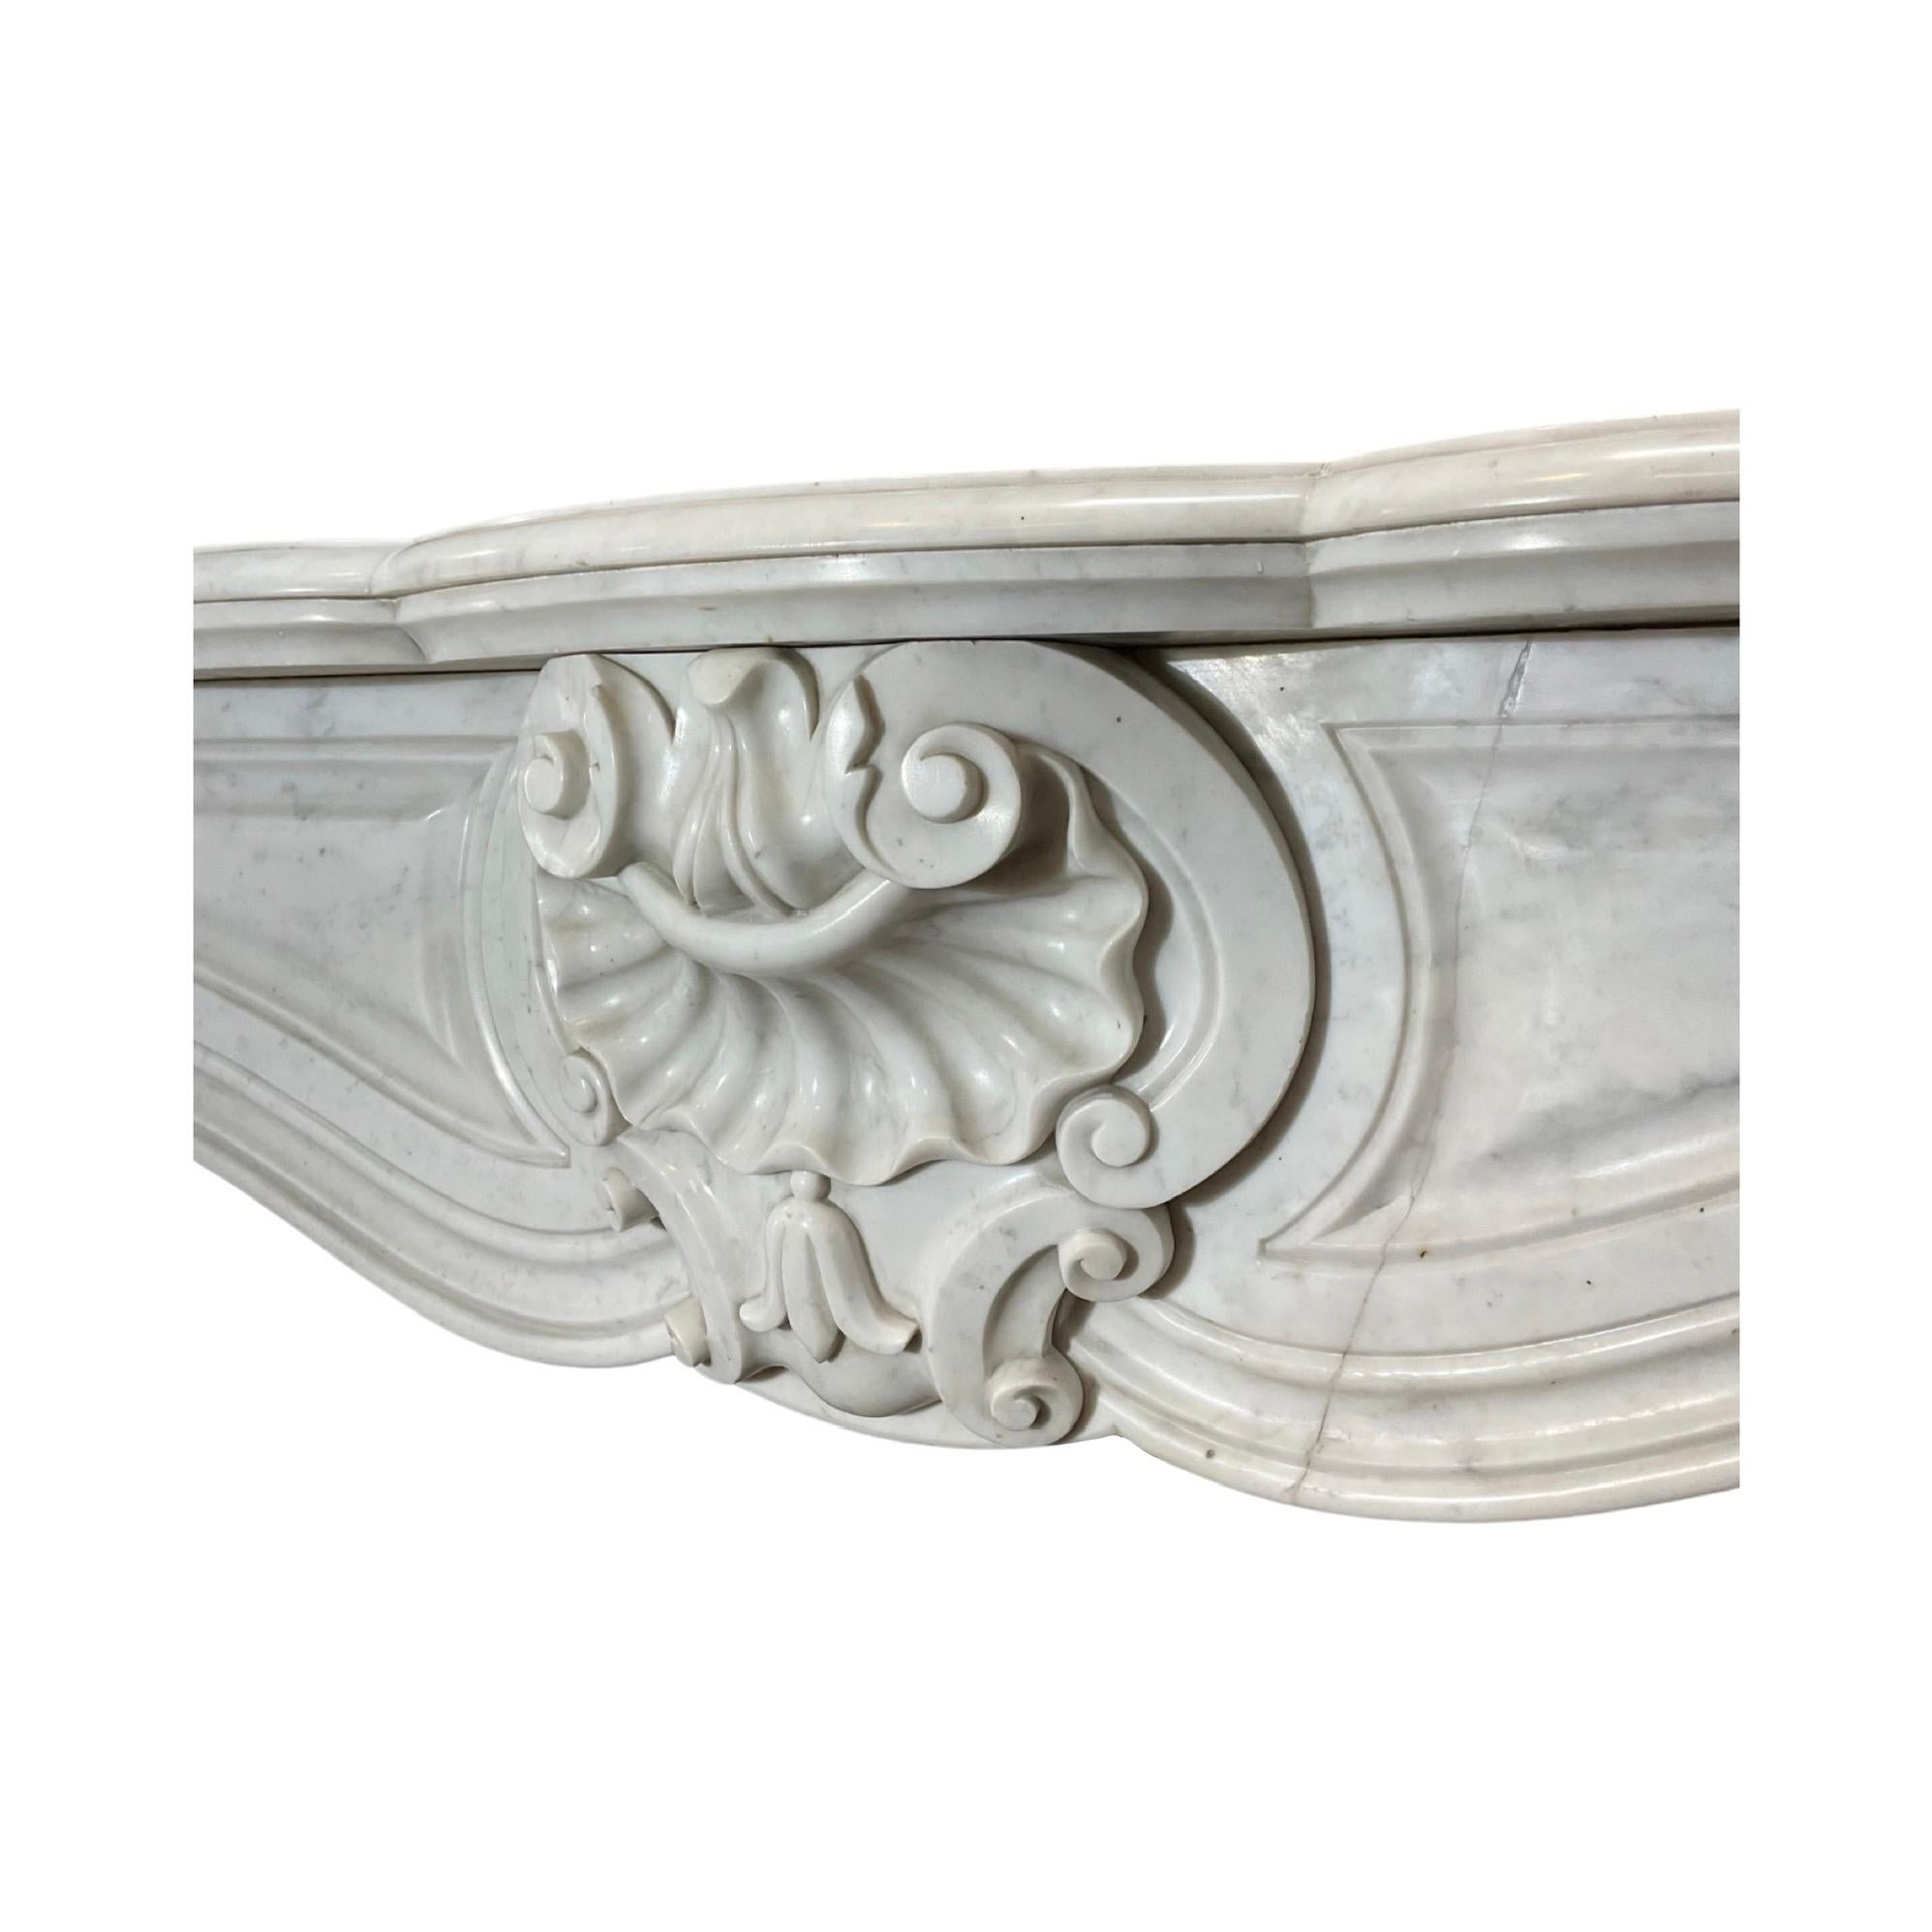 This 18th century French Carrara Marble Mantel features Louis XVI style carvings, making it both classic and timeless. The elegant marble will enhance any space with its timeless beauty and sophistication.